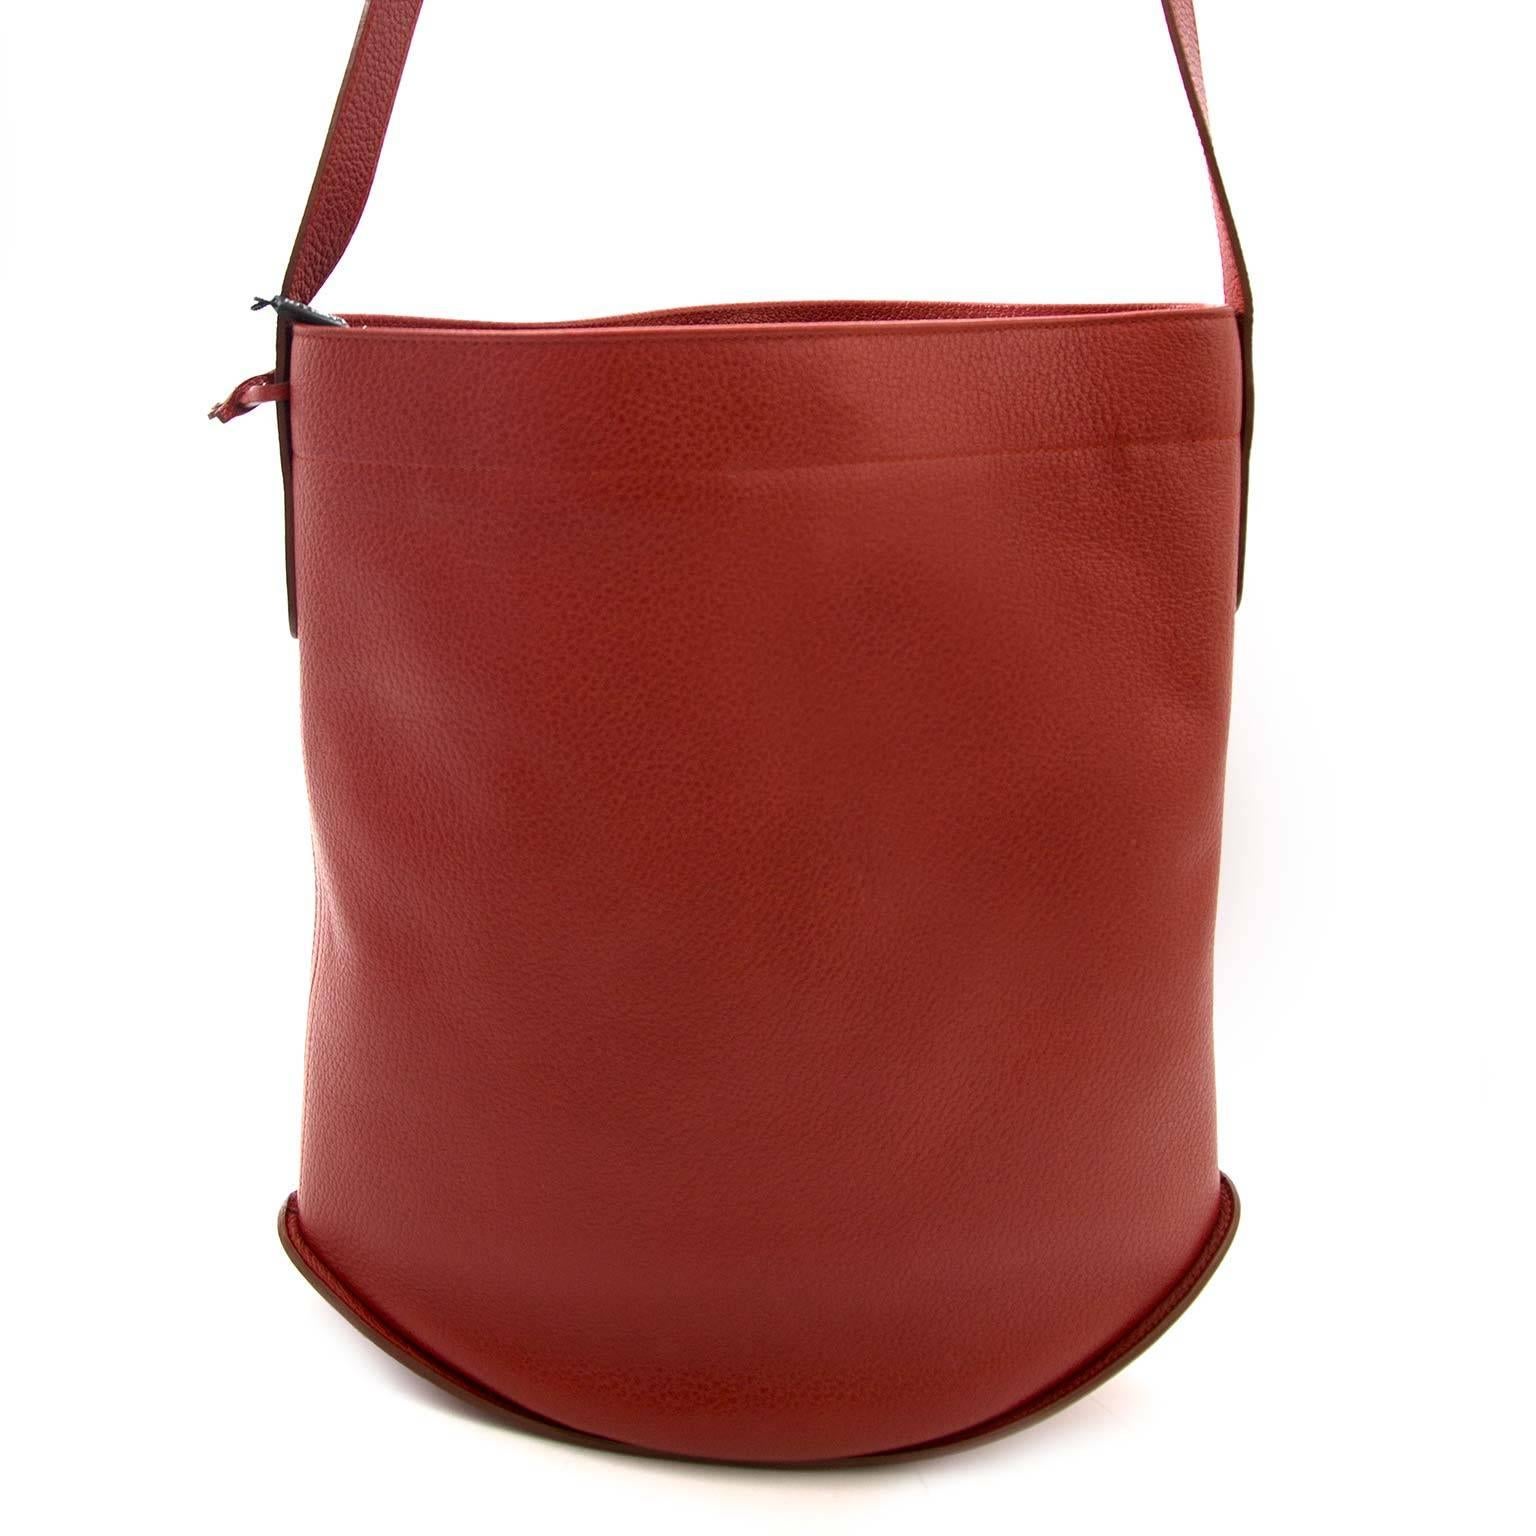 Excellent Condition

Estimated retail price: €2500

Delvaux Le Pin Red Brique Shoulder Bag

This iconic bag by the Belgian house Delvaux is a true beauty. Le pin was first introduced in the '70.
Delvaux's in house designer Solange Schwennicke was